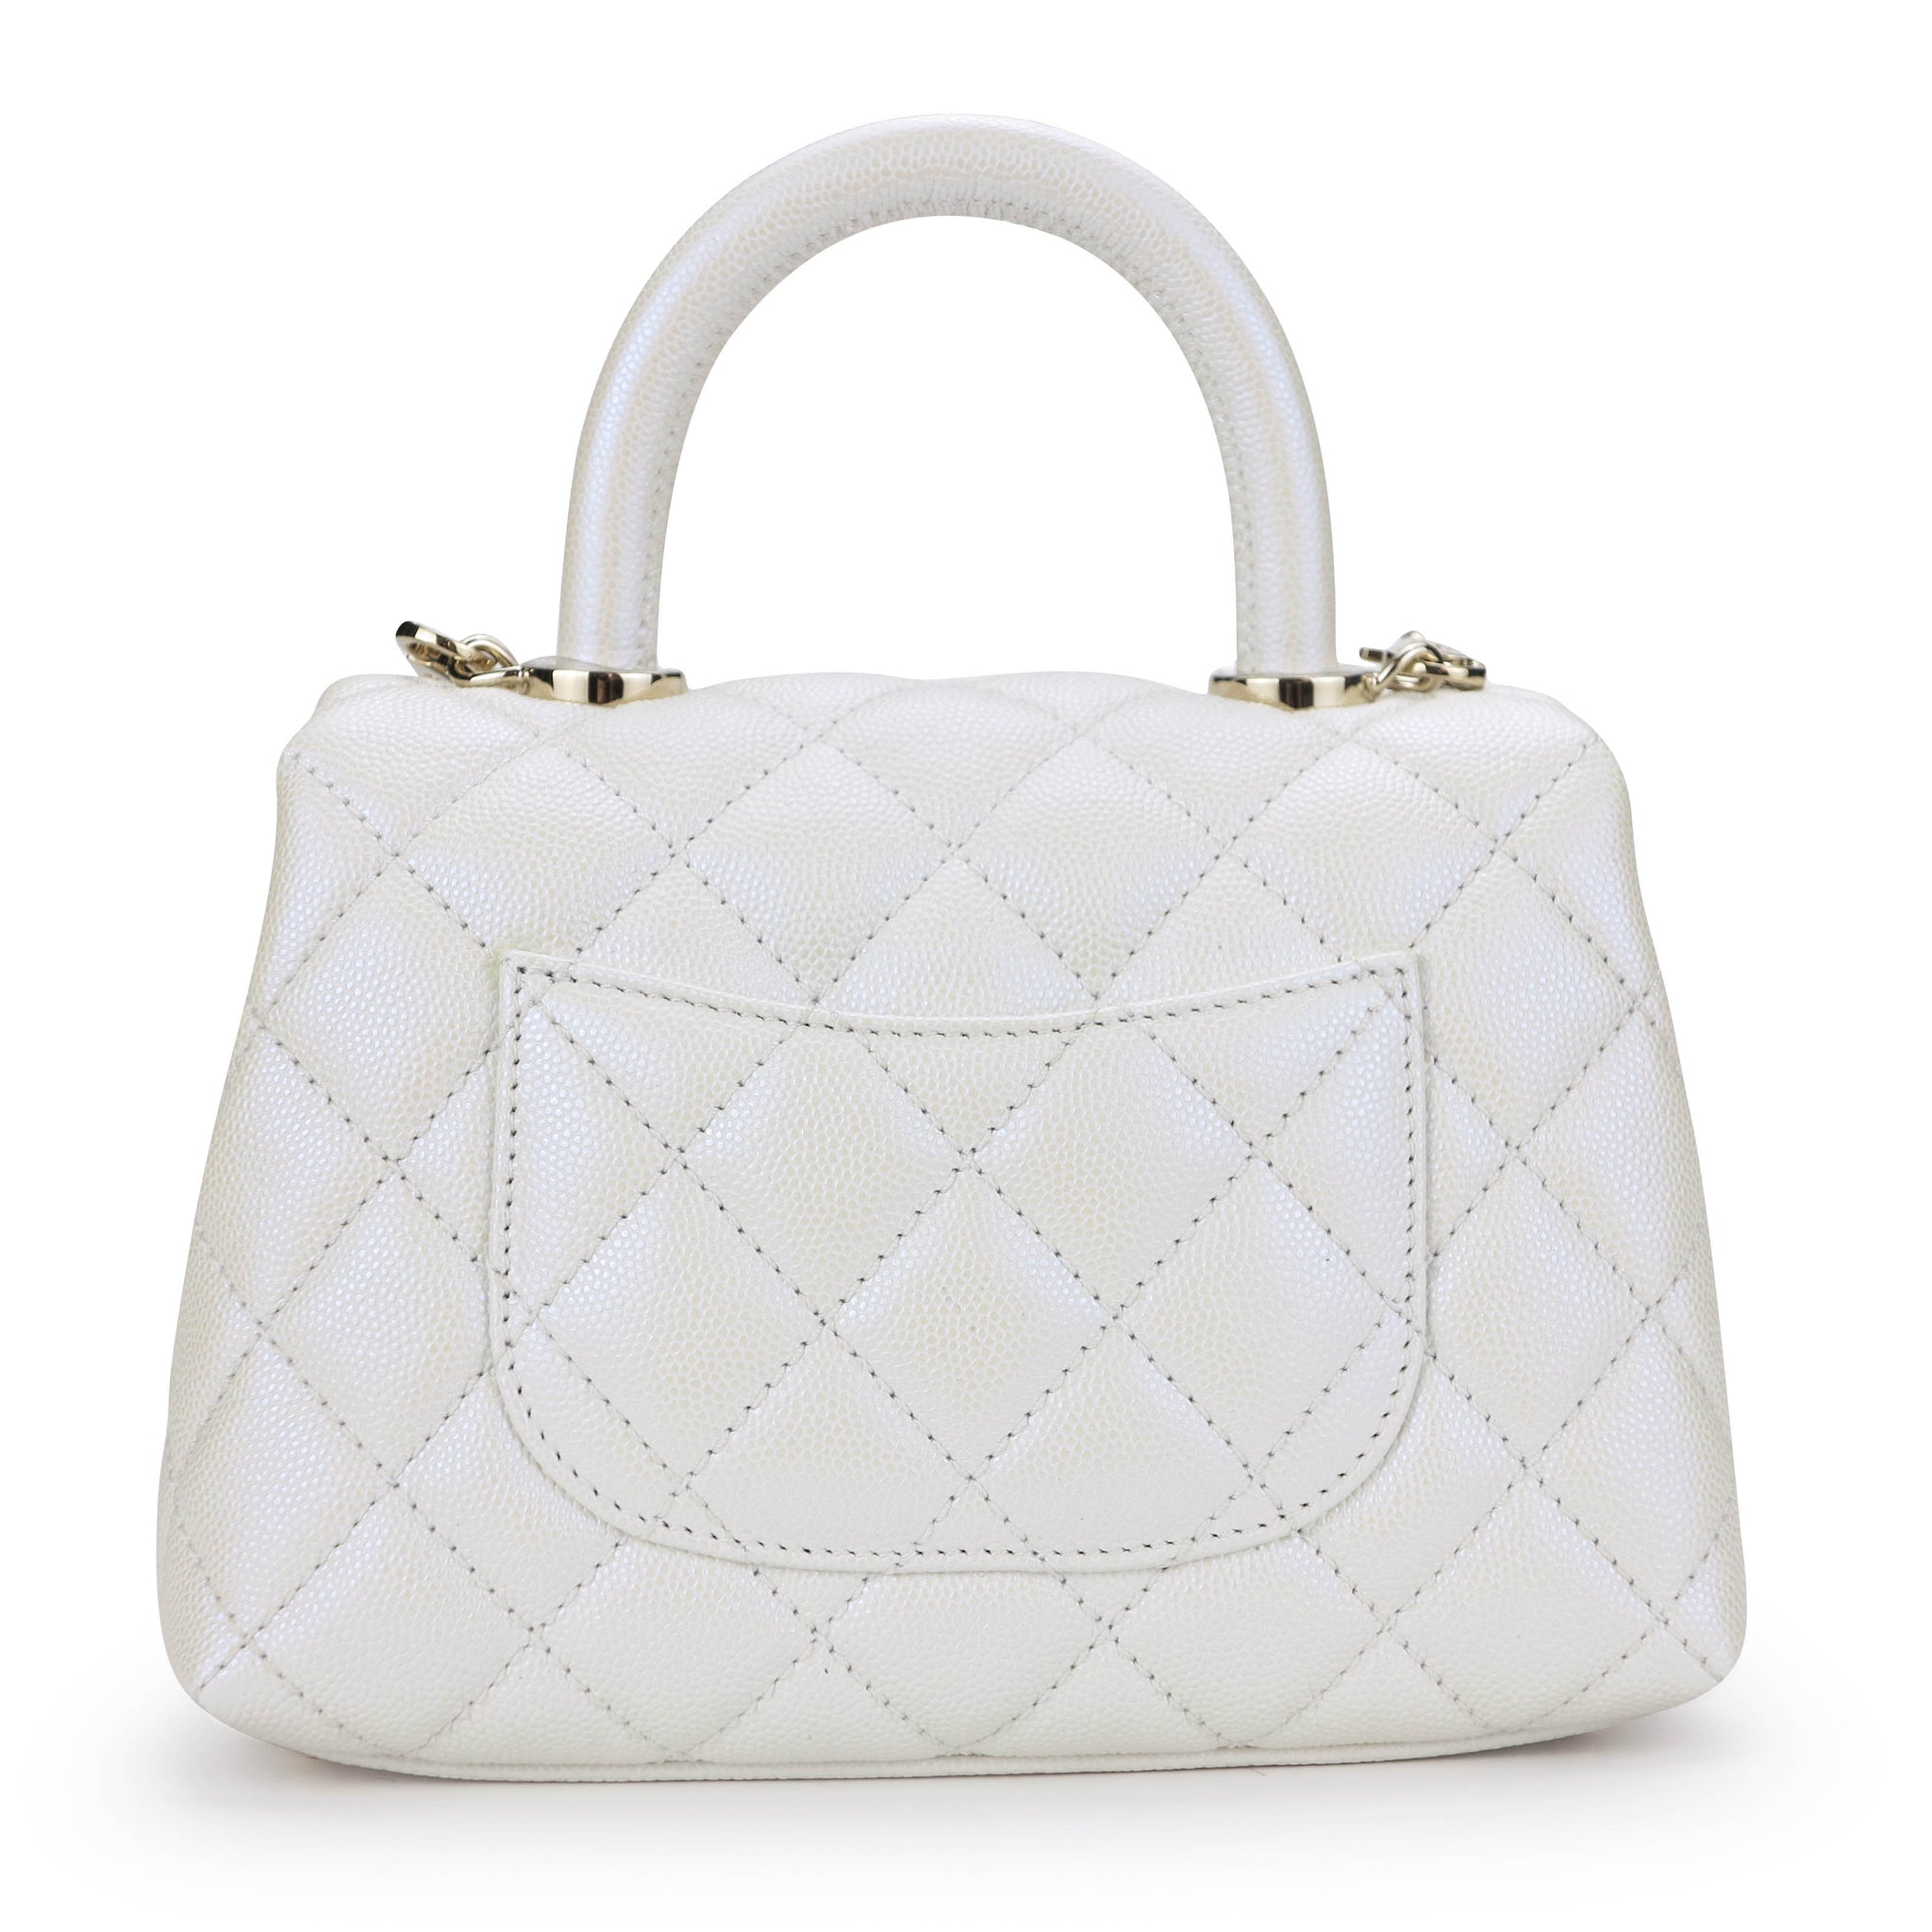 Chanel Extra Mini Coco Handle Flap Bag In k Iridescent White Caviar Dearluxe